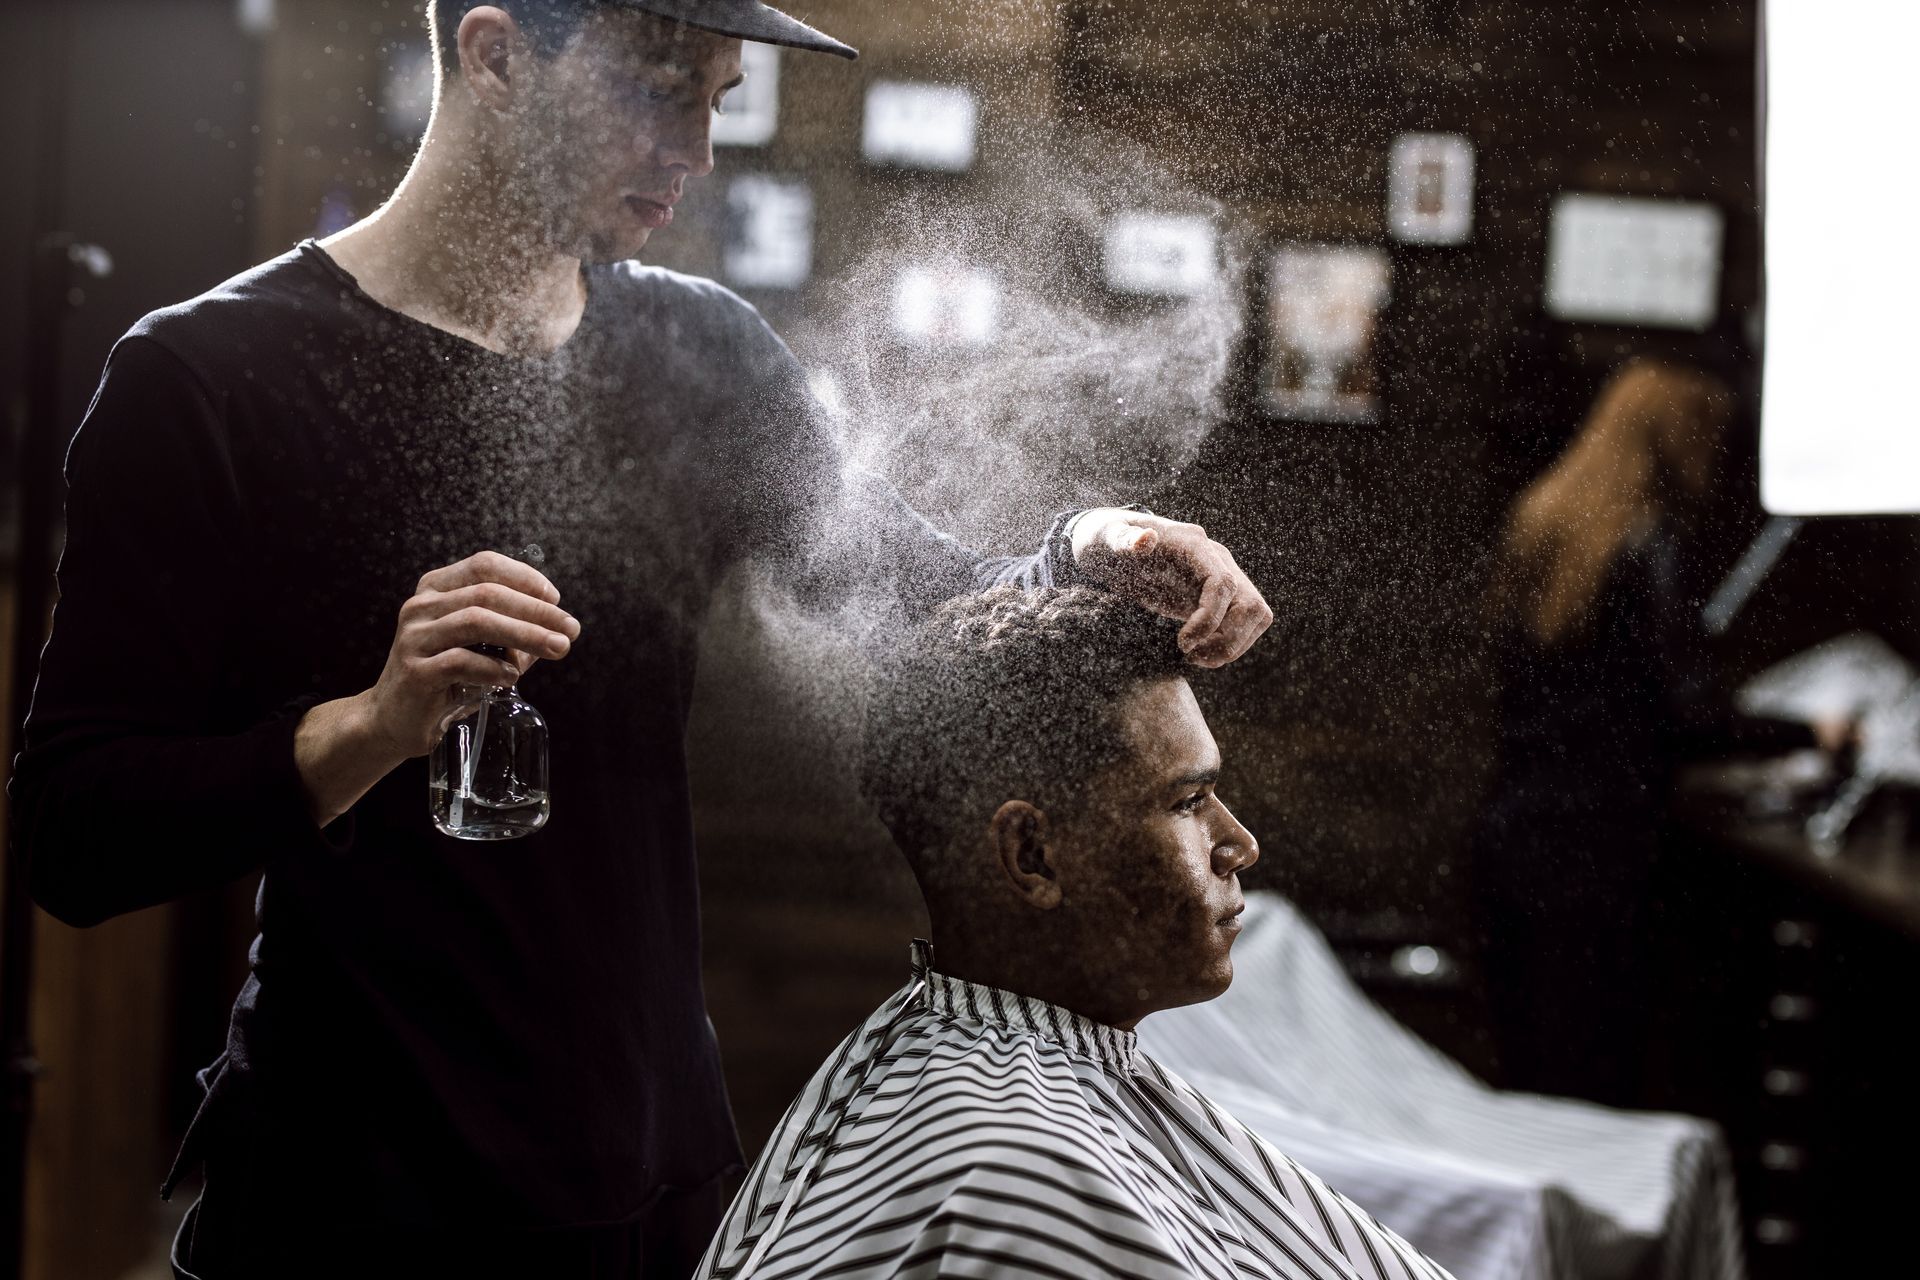 Barber Spraying Water on the Client's Hair